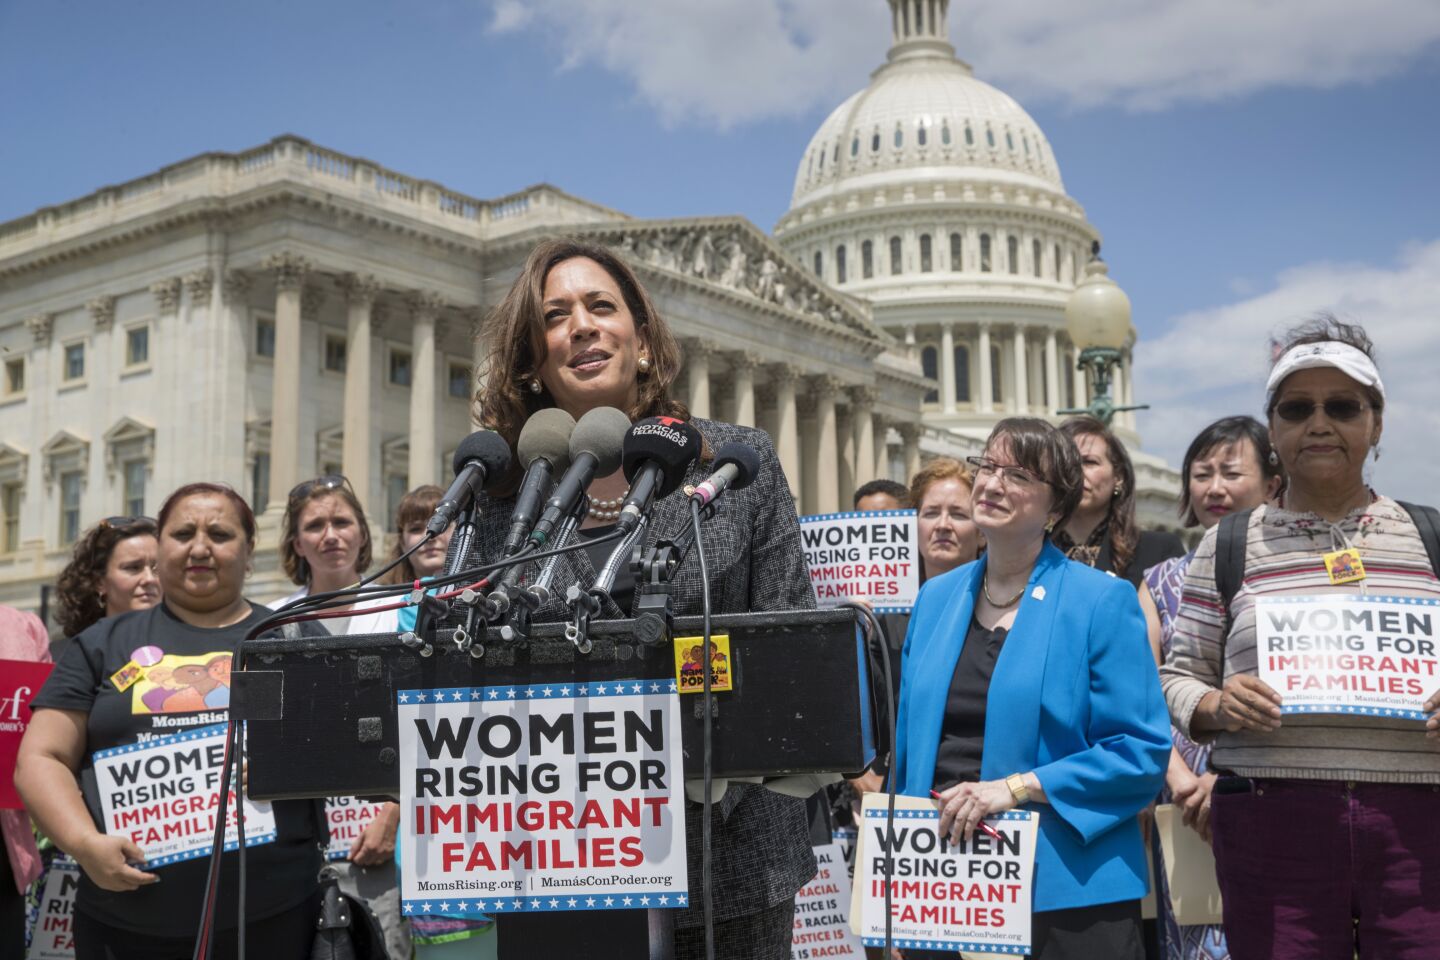 May 23, 2018: Sen. Kamala Harris joins a women's advocacy group, MomsRising, at the Capitol.